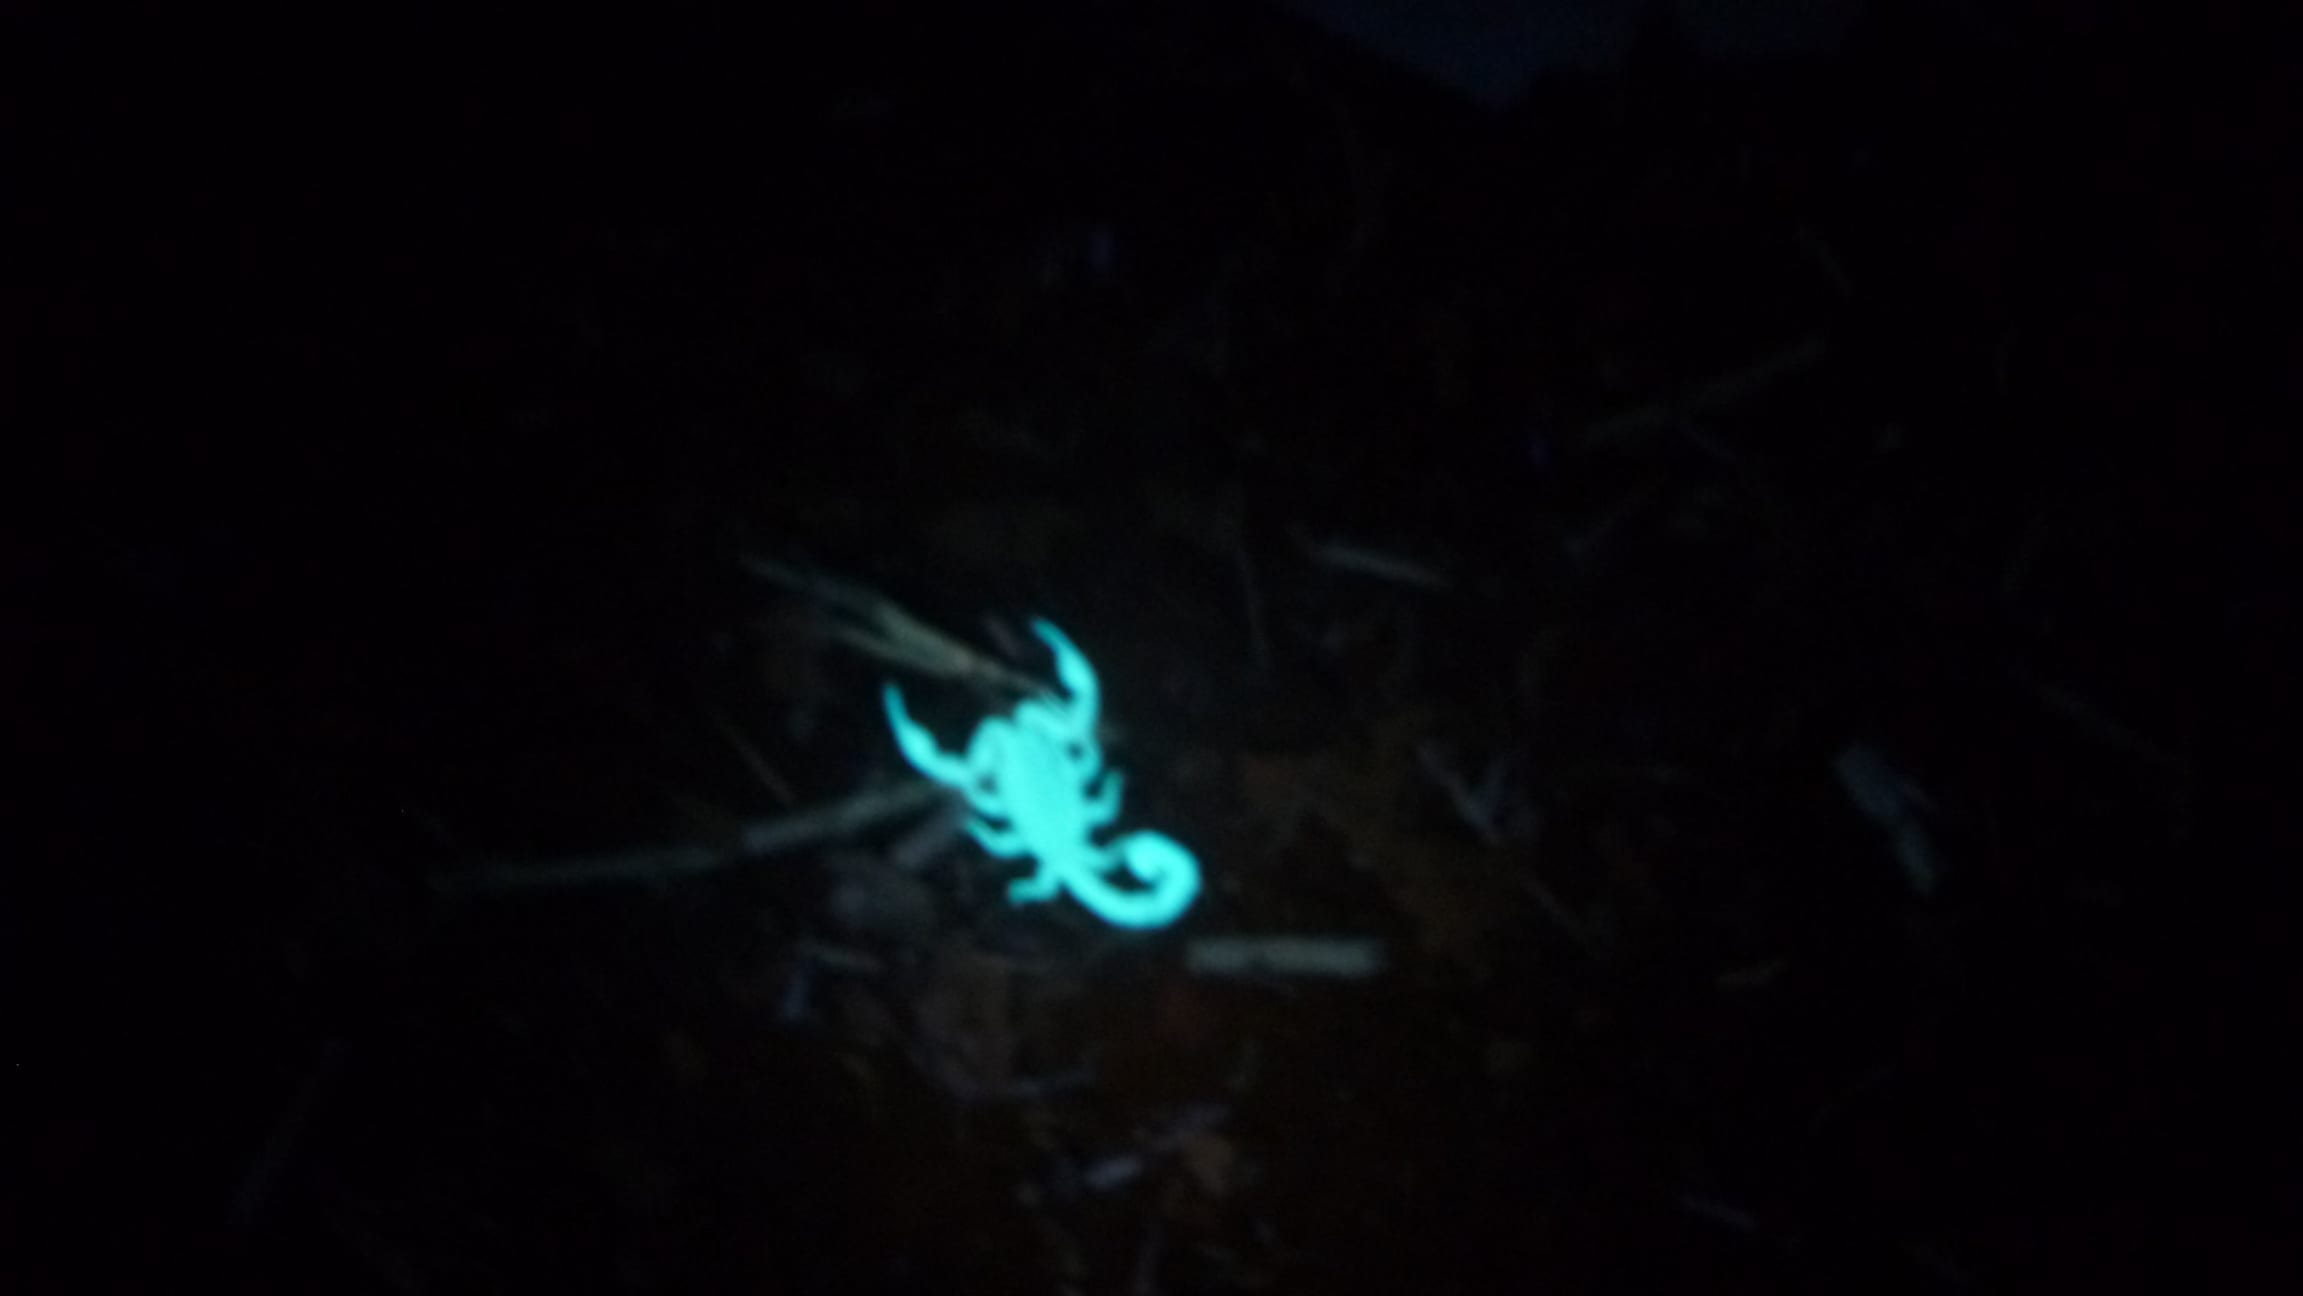 Did you know that all scorpions glow in the dark when under a UV light